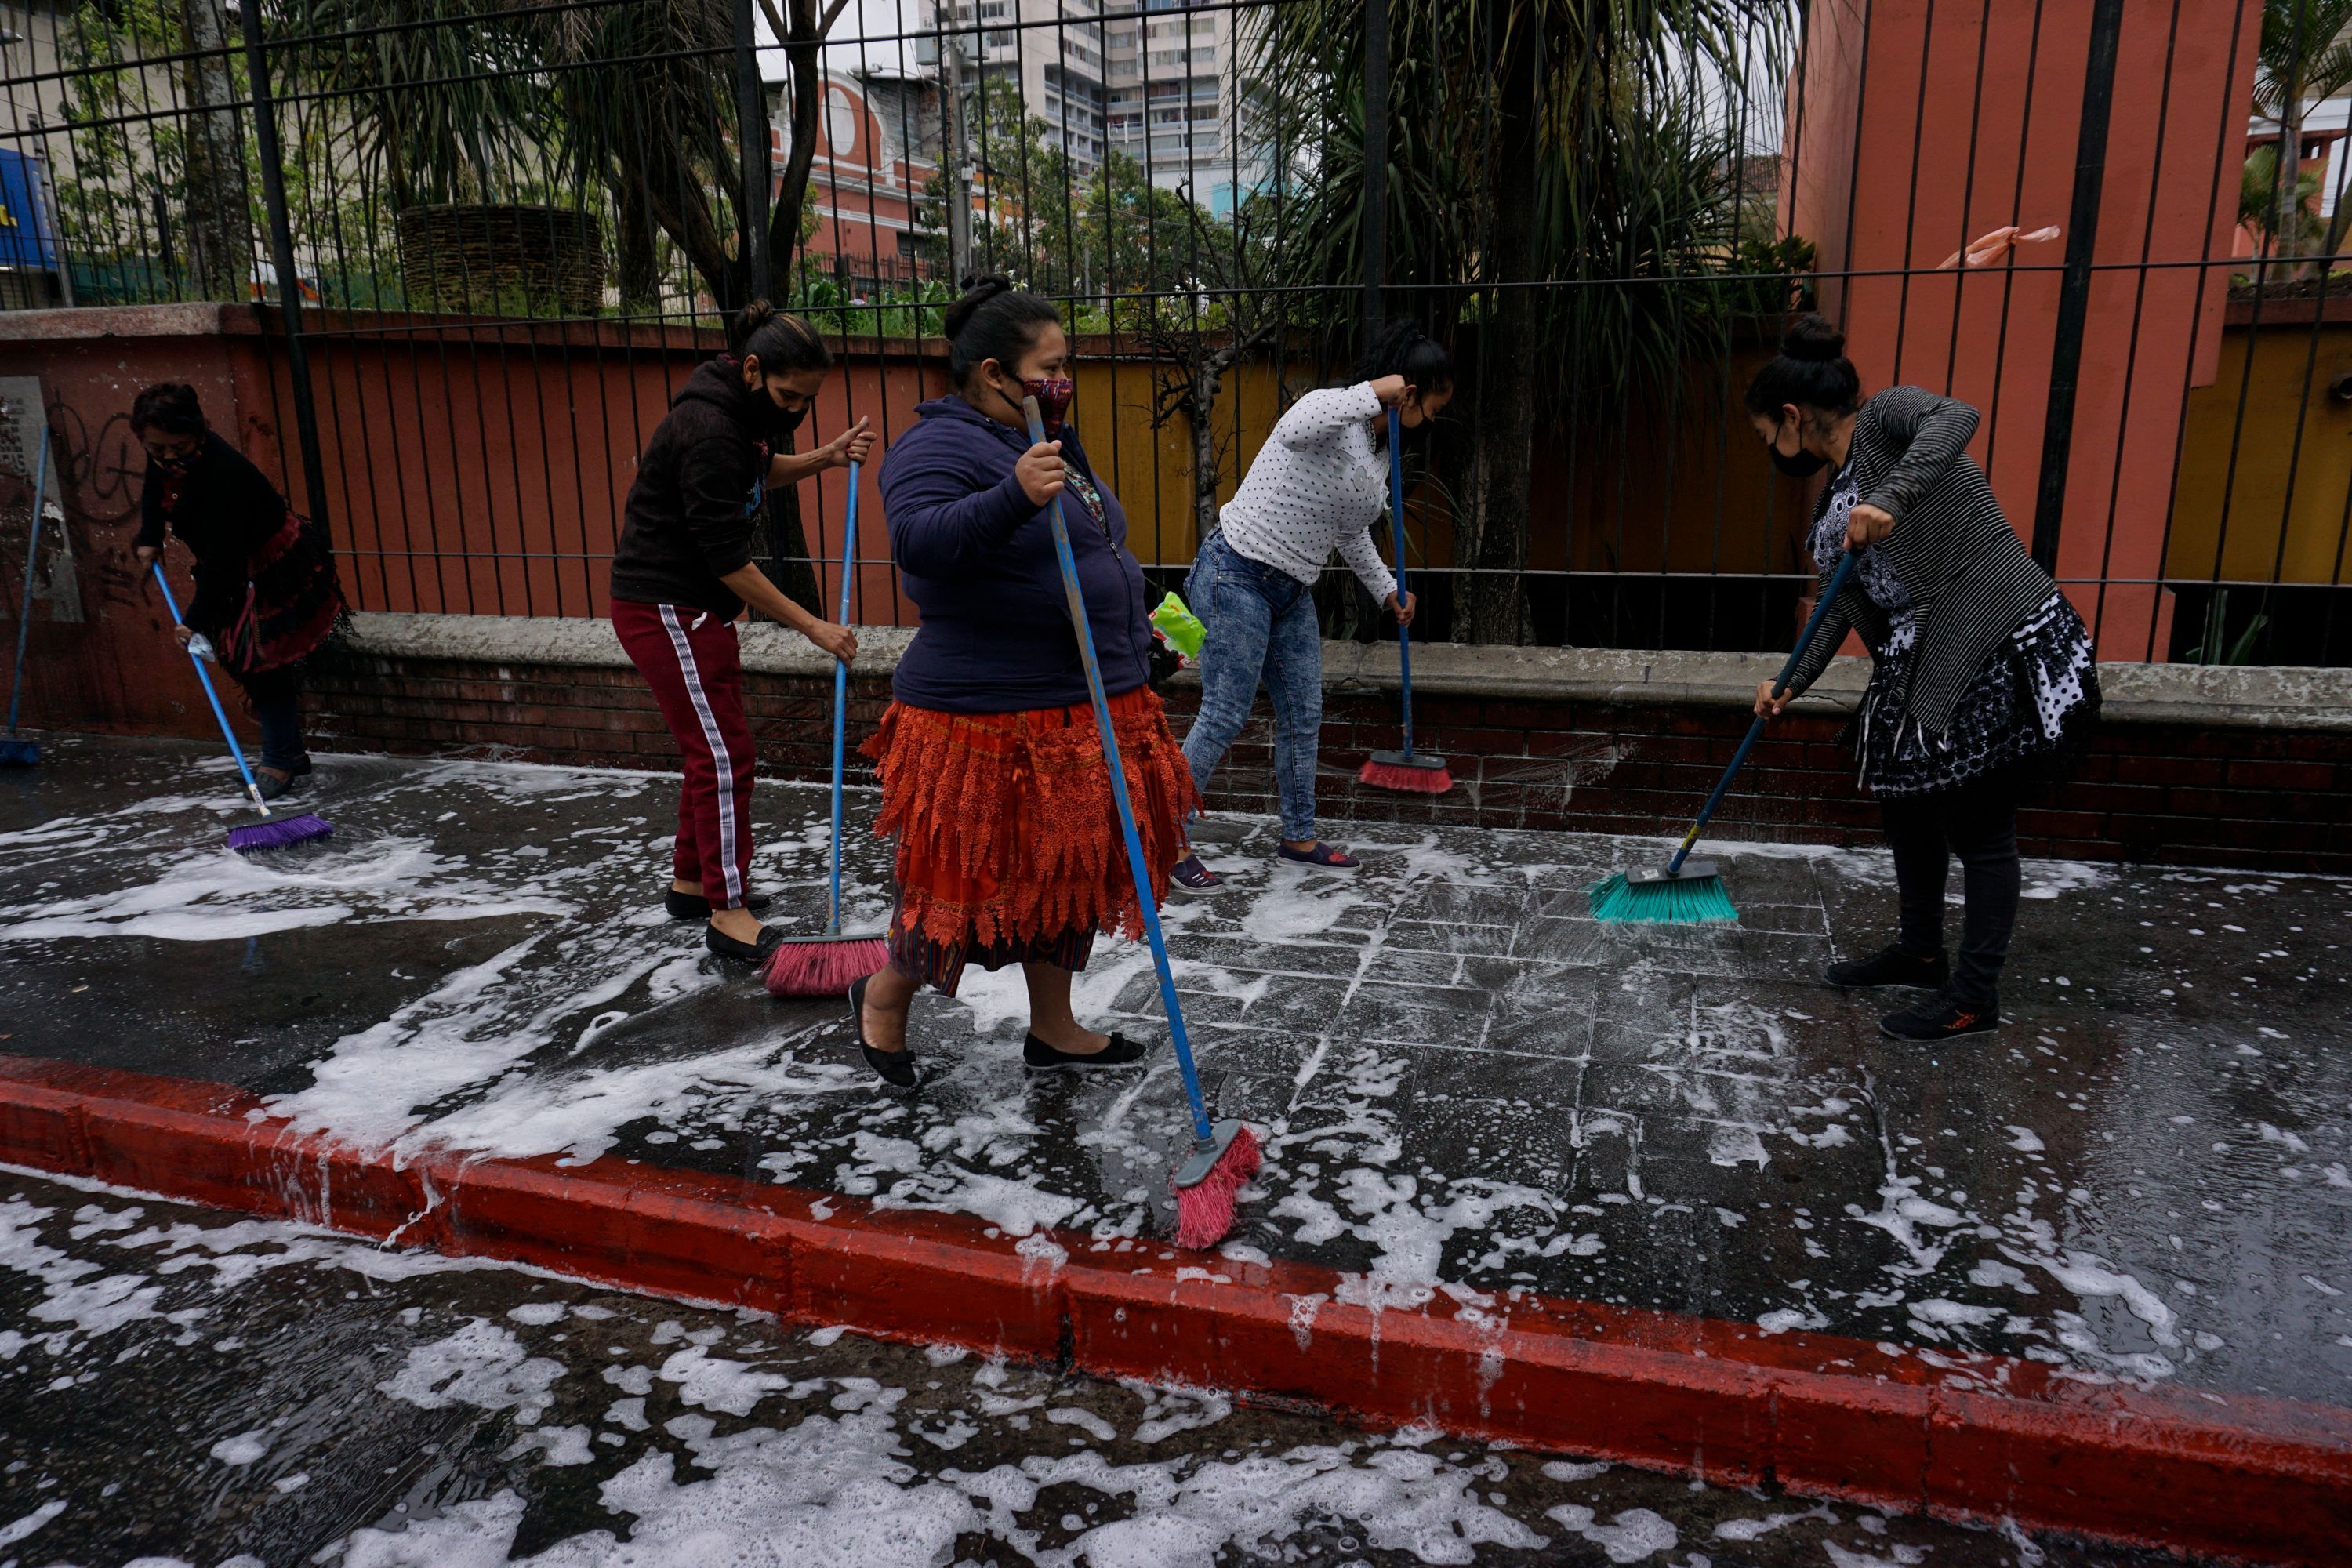 Sellers at the Central market disinfect the place as a preventive measure against the spread of COVID-19, in Guatemala City, on March 9